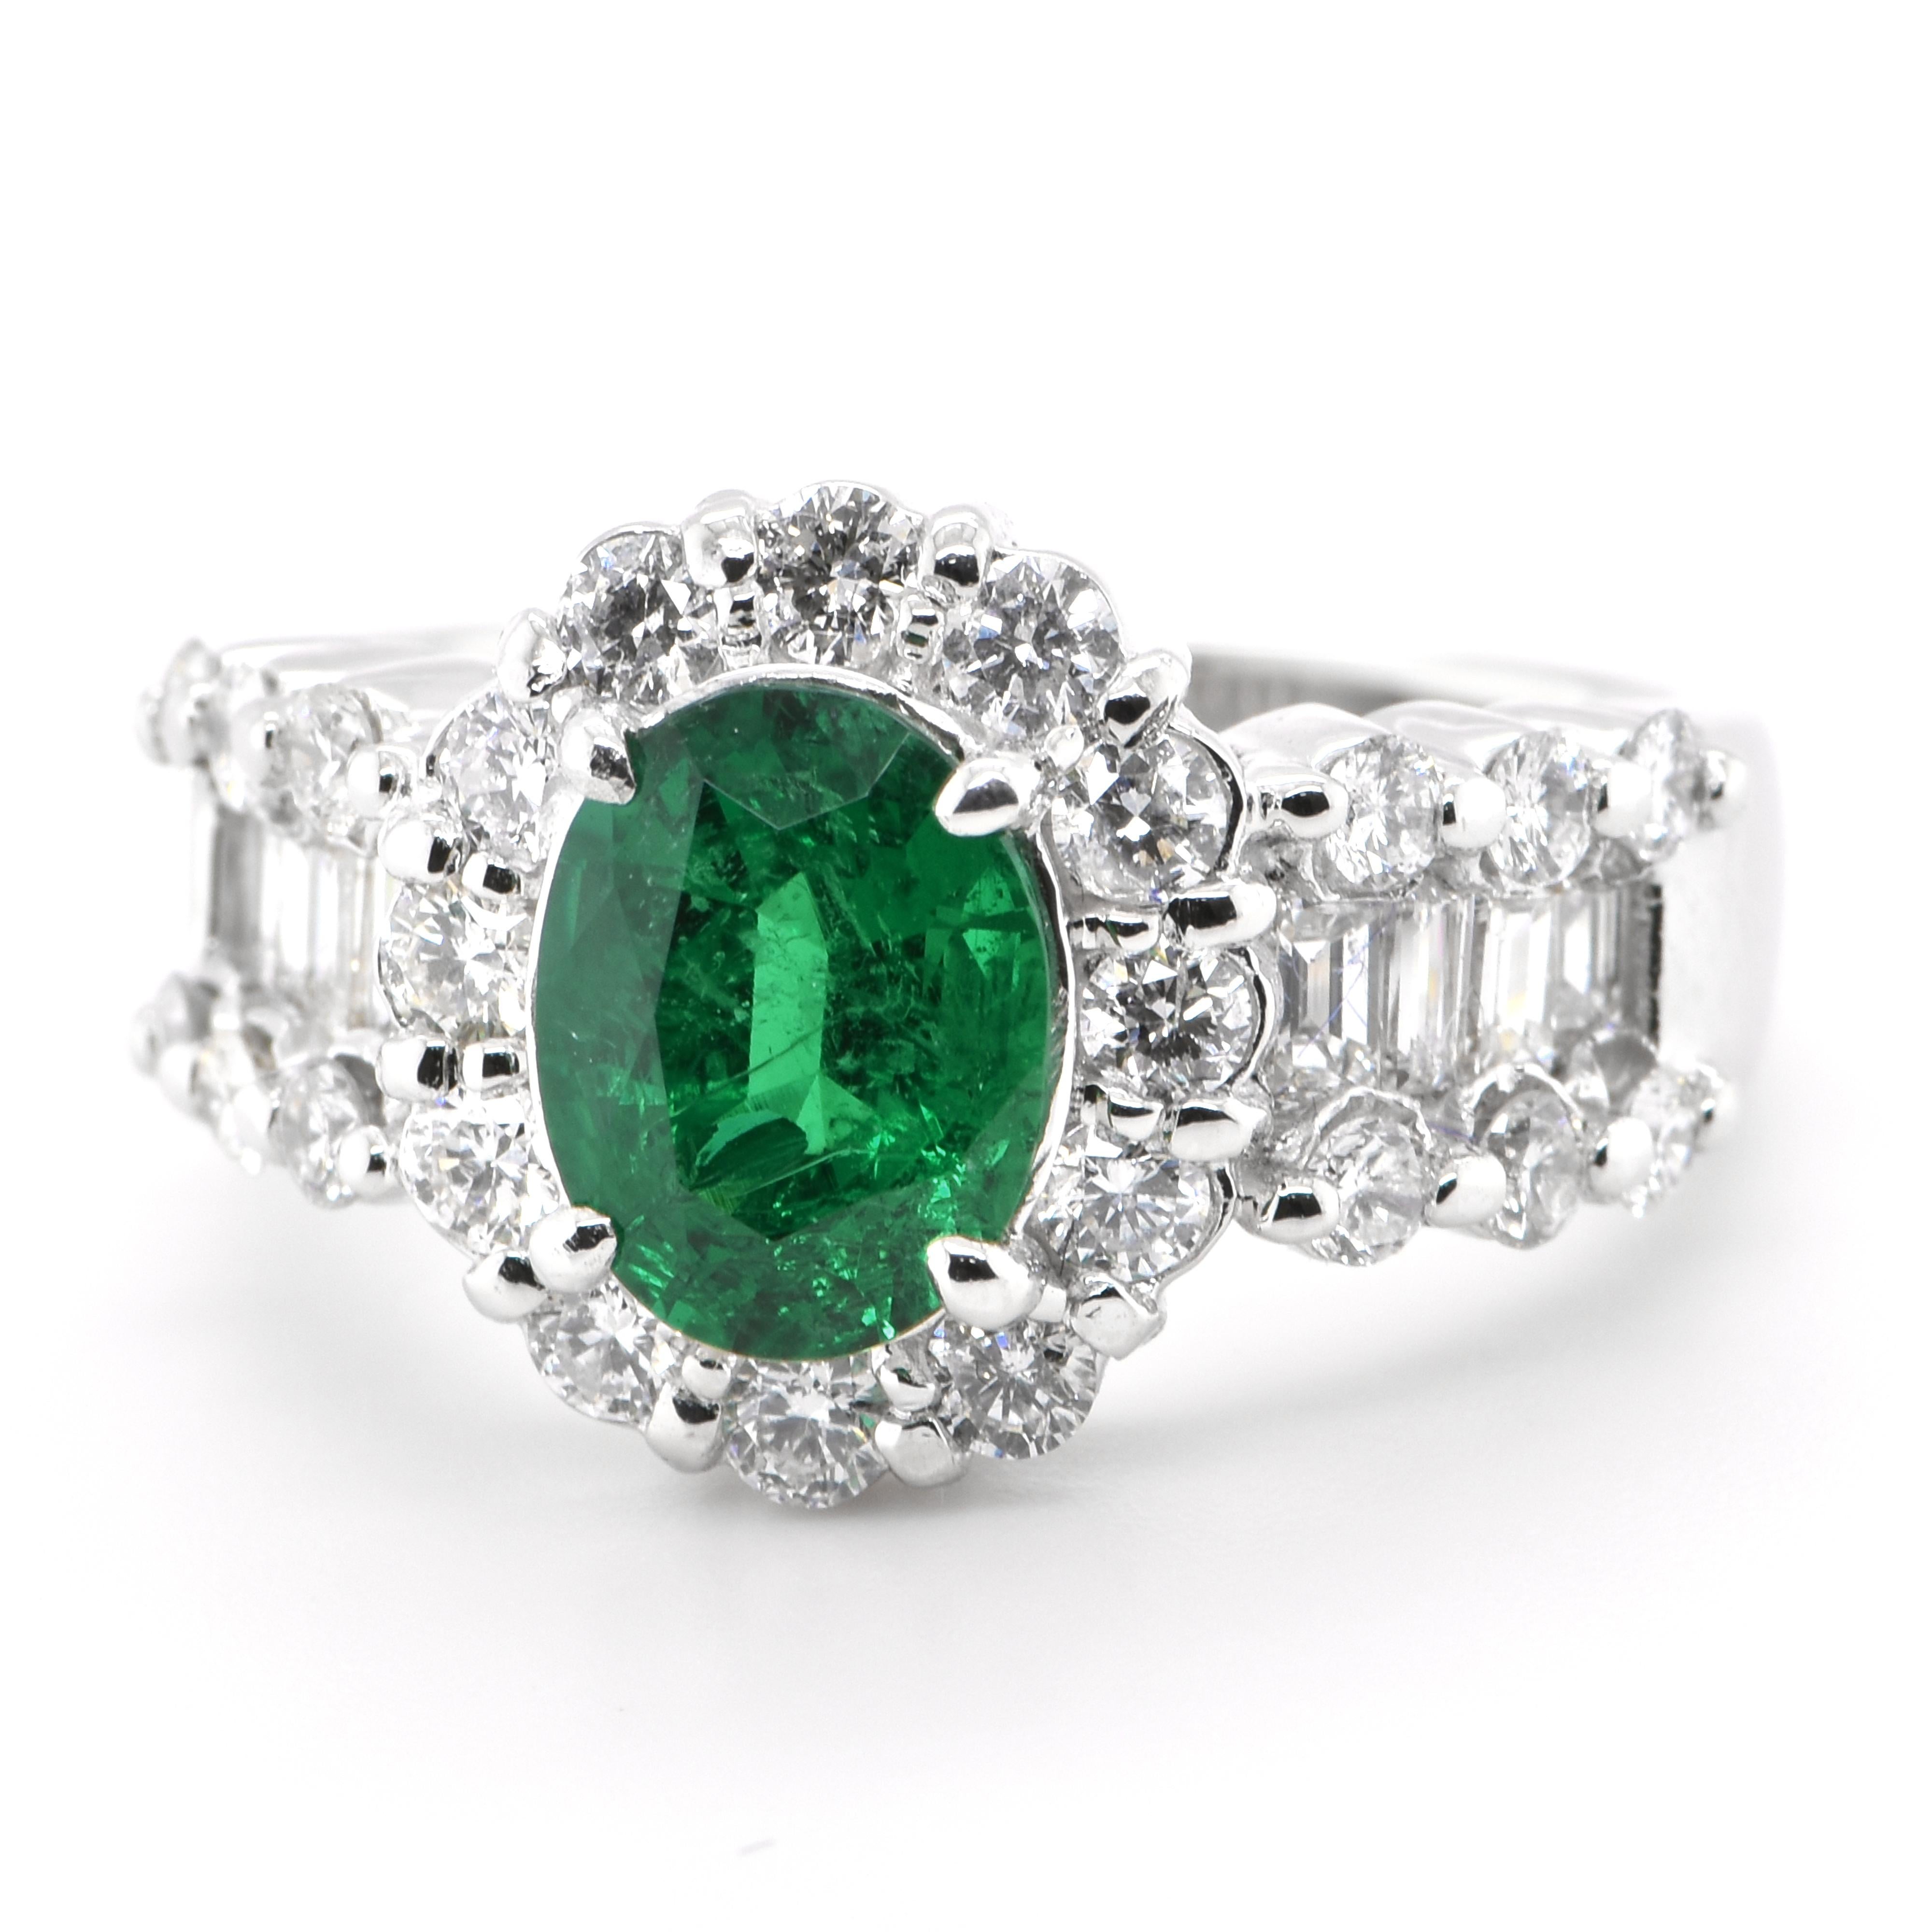 A stunning cocktail ring featuring a 1.64 Carat Natural Emerald and 1.31 Carats of Diamond Accents set in Platinum. People have admired emerald’s green for thousands of years. Emeralds have always been associated with the lushest landscapes and the